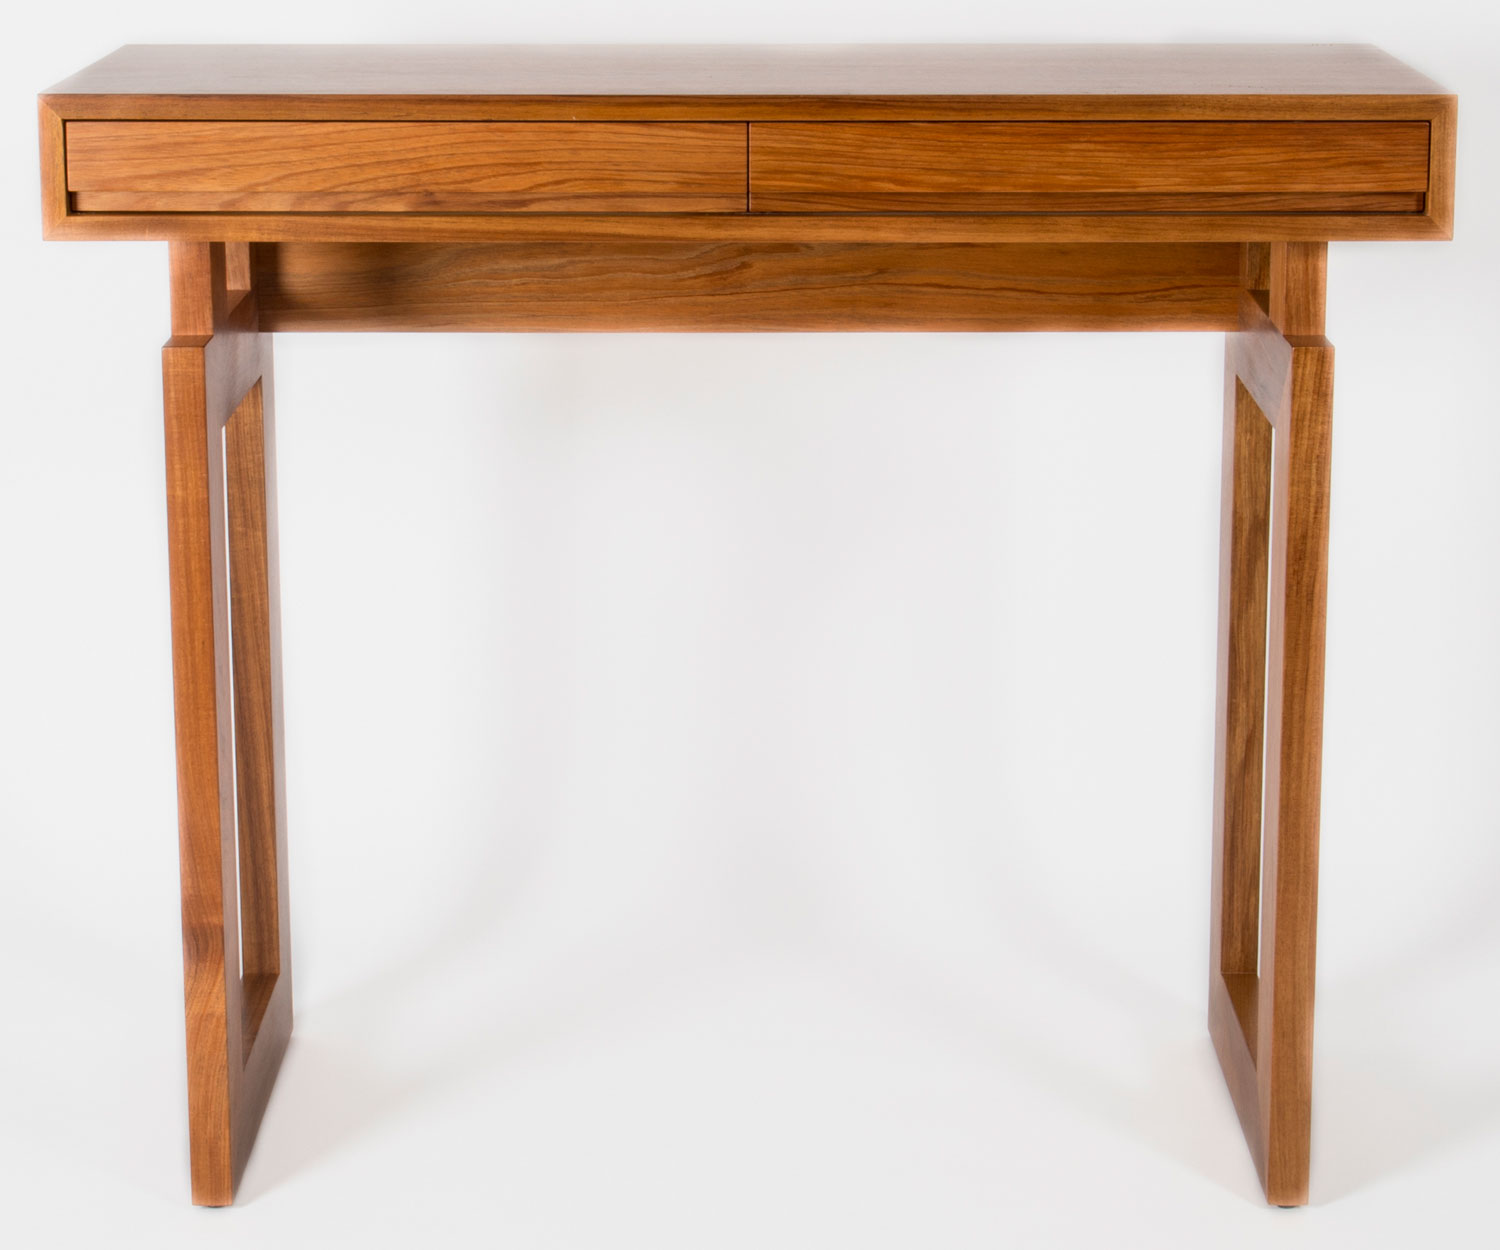 Highfields Console Table by Australian furniture maker, FHG